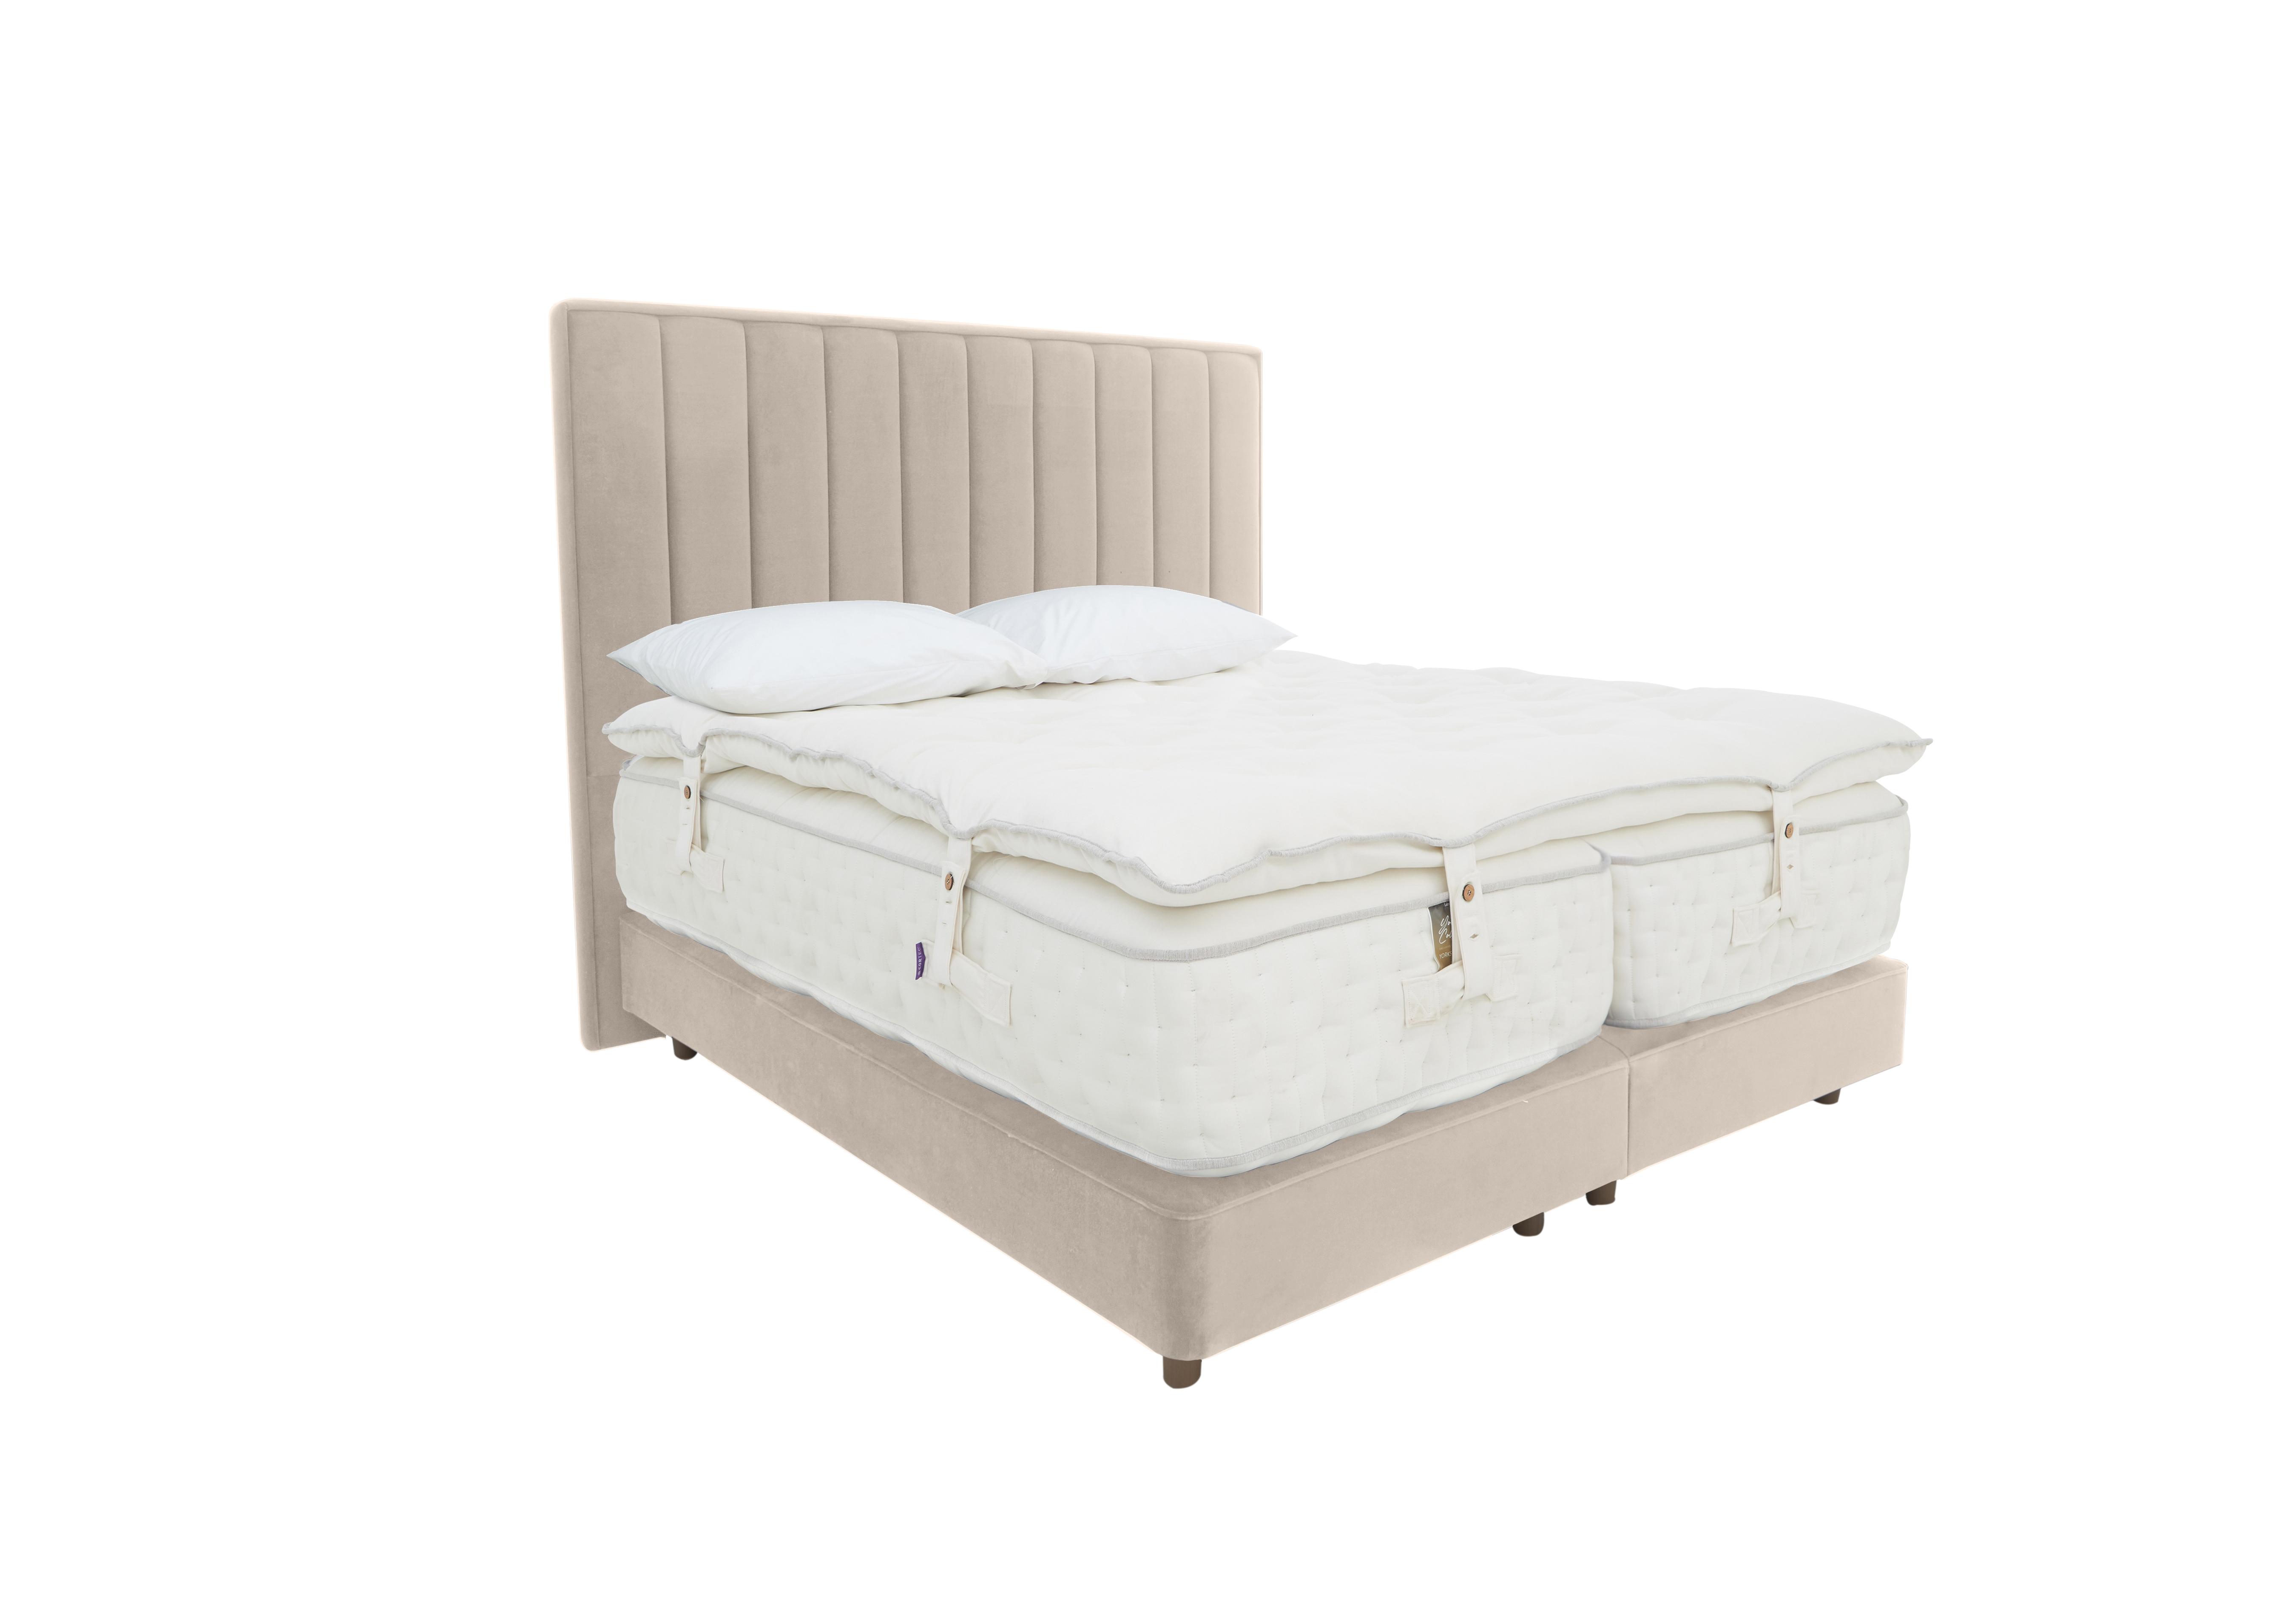 Yorkshire 40K Shallow Divan Set with Zip and Link Mattress with Mattress Topper in Seven Ivory on Furniture Village